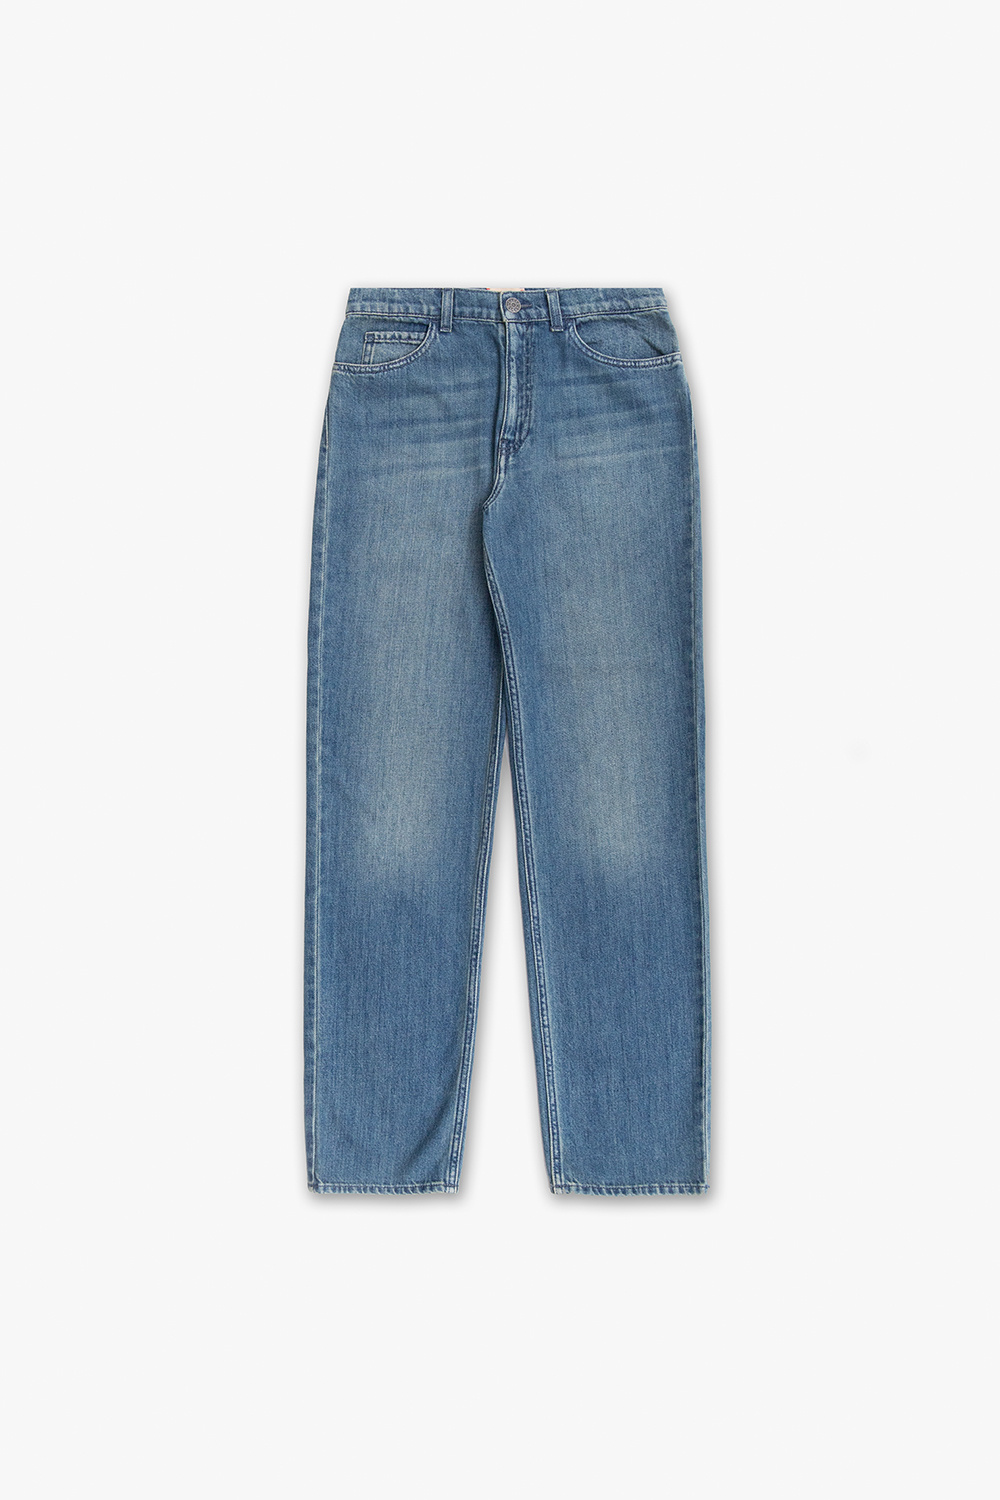 Gucci Kids Patched jeans